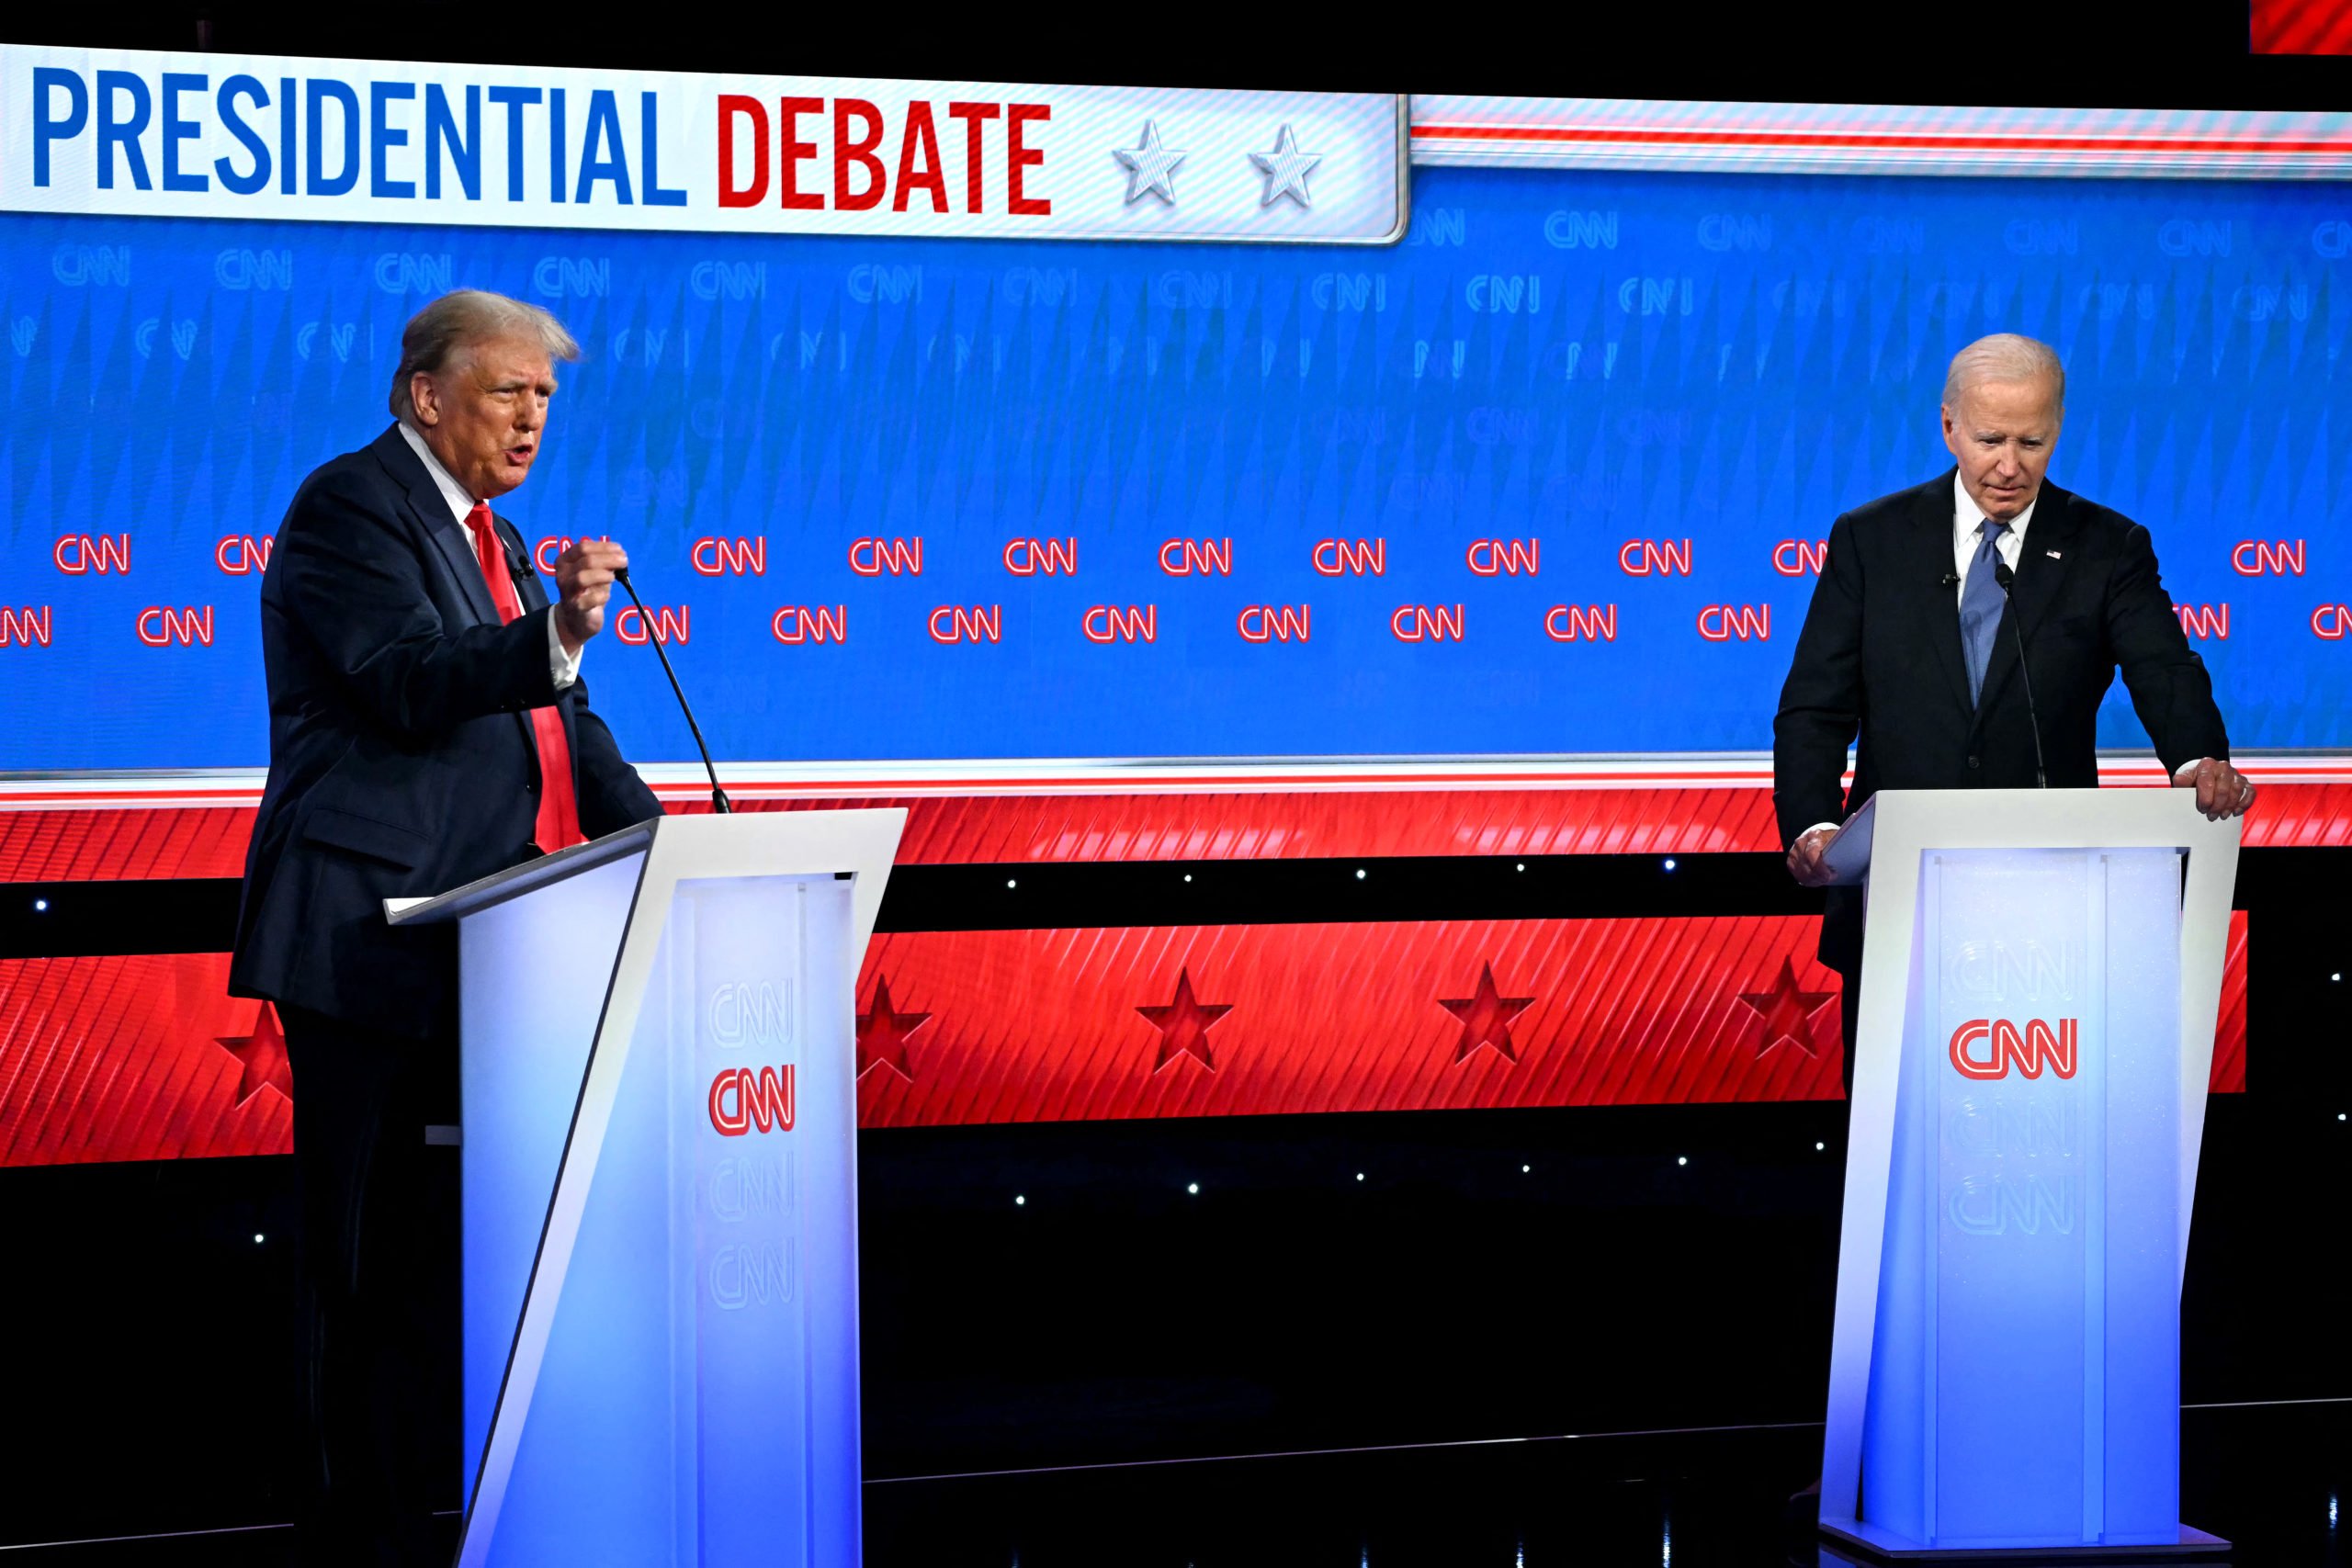 US President Joe Biden and former US President and Republican presidential candidate Donald Trump participate in the first presidential debate of the 2024 elections at CNN's studios in Atlanta, Georgia, on June 27, 2024. (Photo by ANDREW CABALLERO-REYNOLDS / AFP) (Photo by ANDREW CABALLERO-REYNOLDS/AFP via Getty Images)